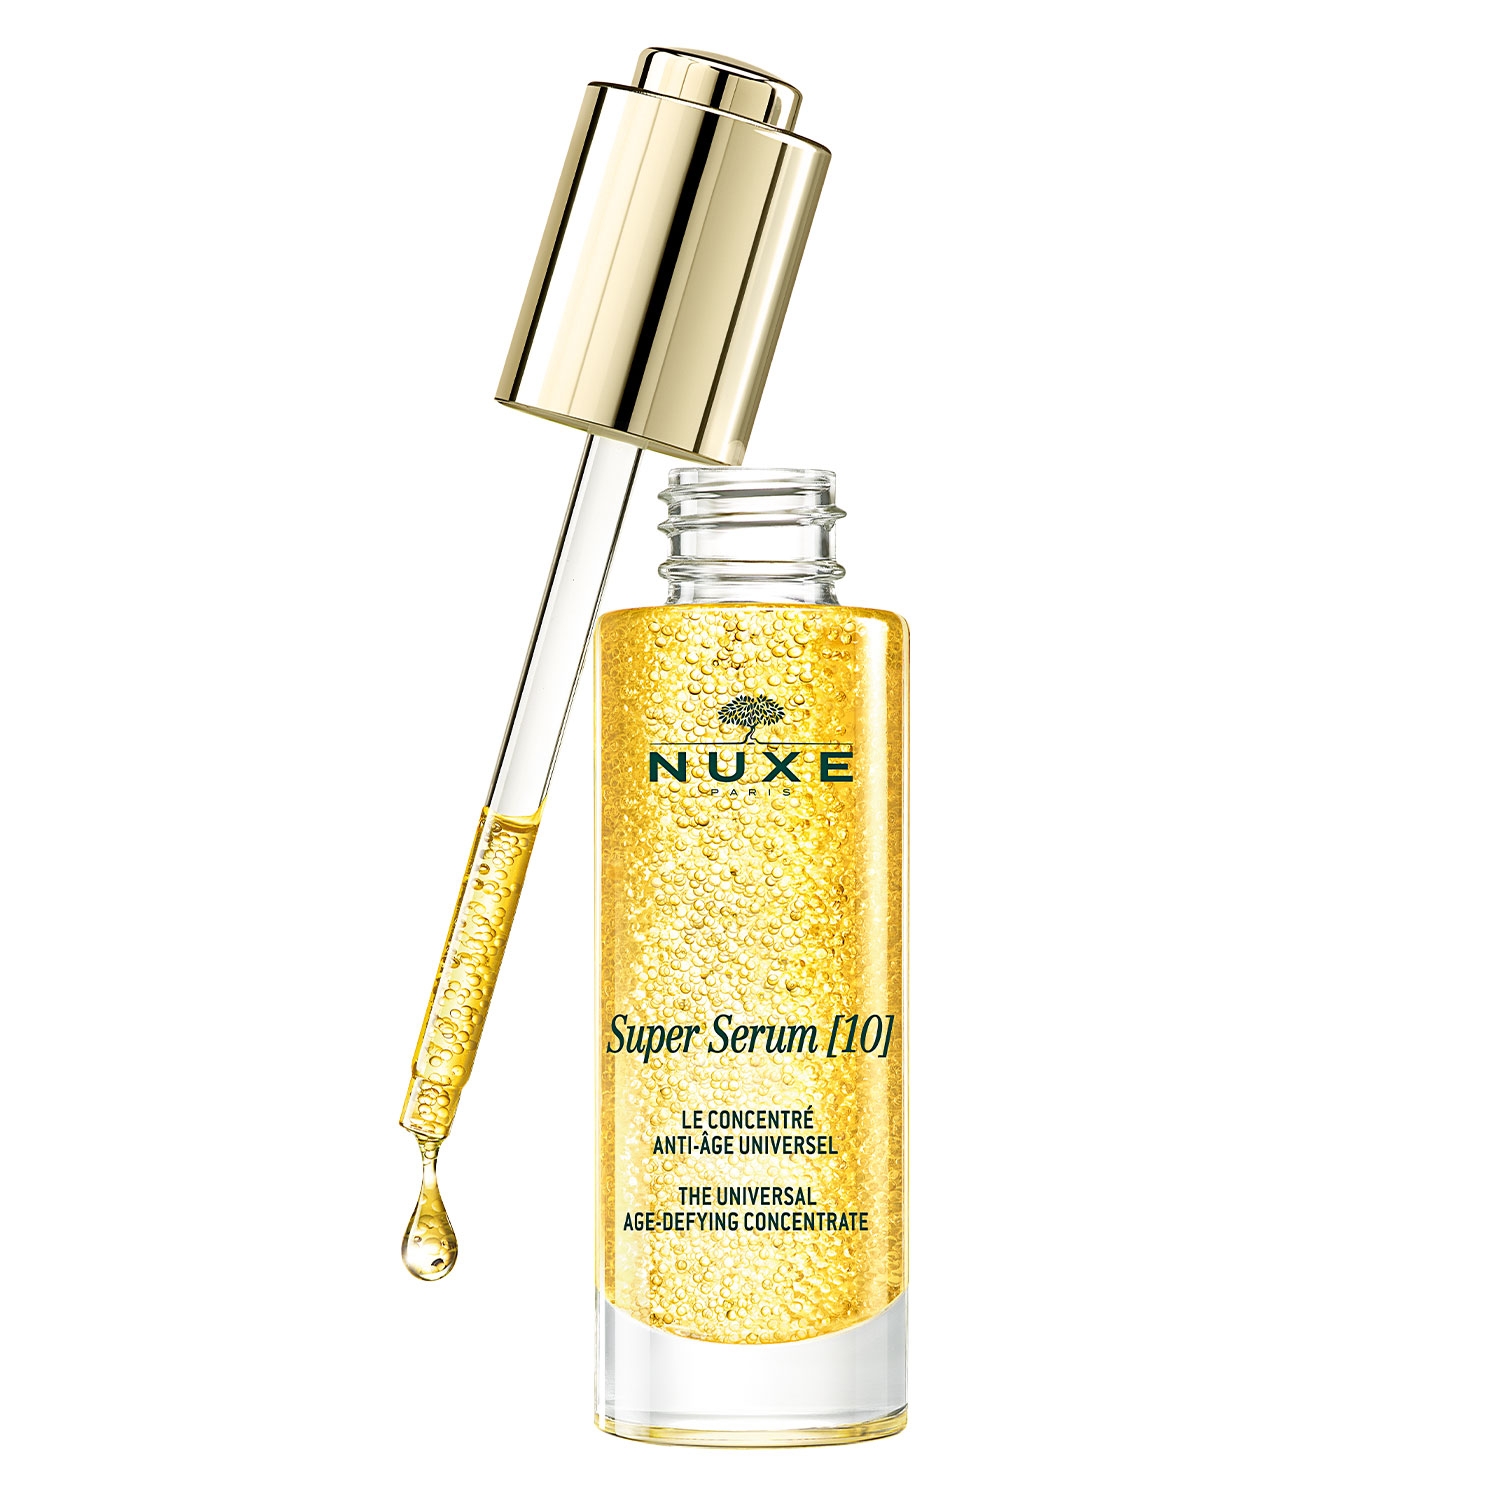 Product image from Nuxe Face - Super Serum [10]